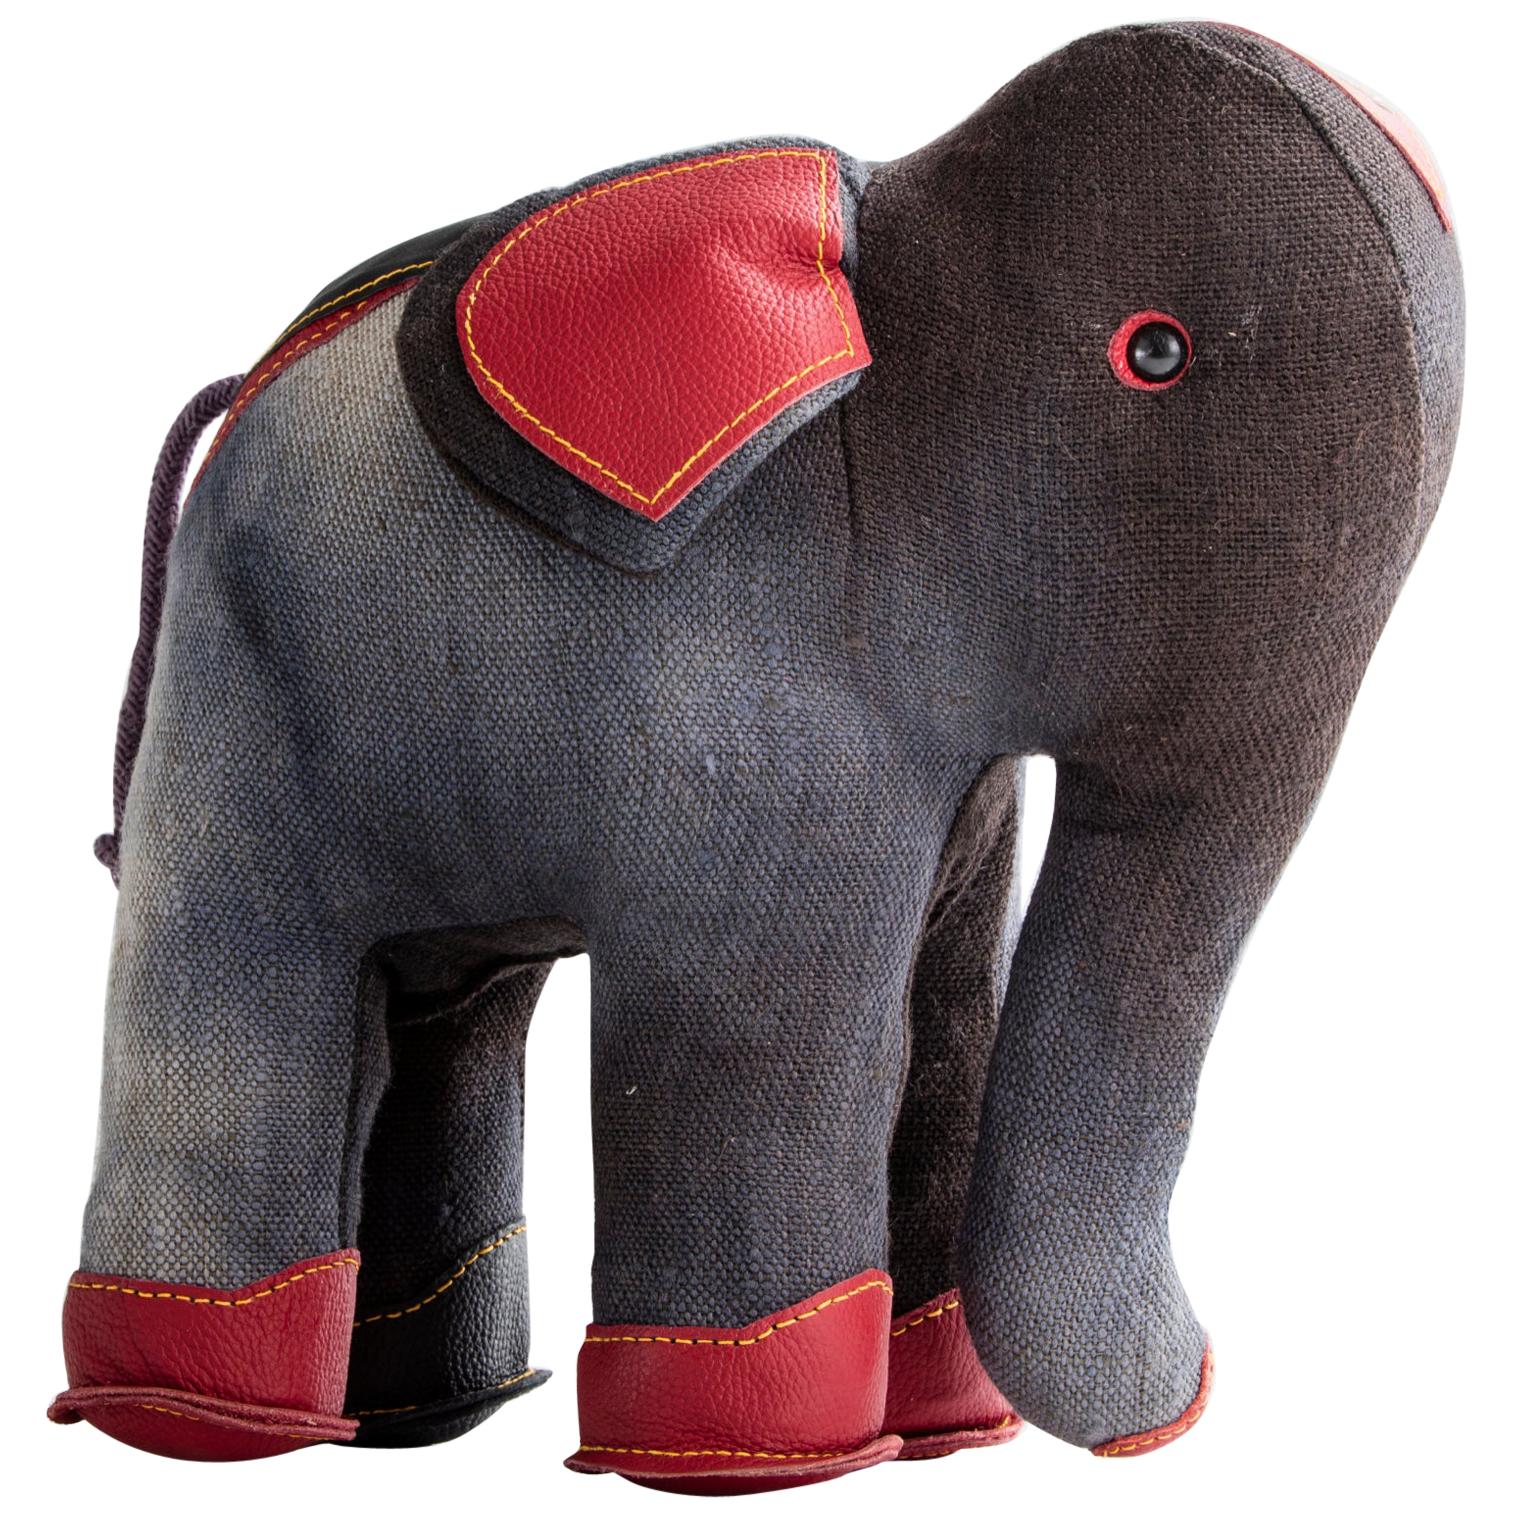 Therapeutic Elephant Toy in Jute and Leather by Renate Müller, 1981-1982